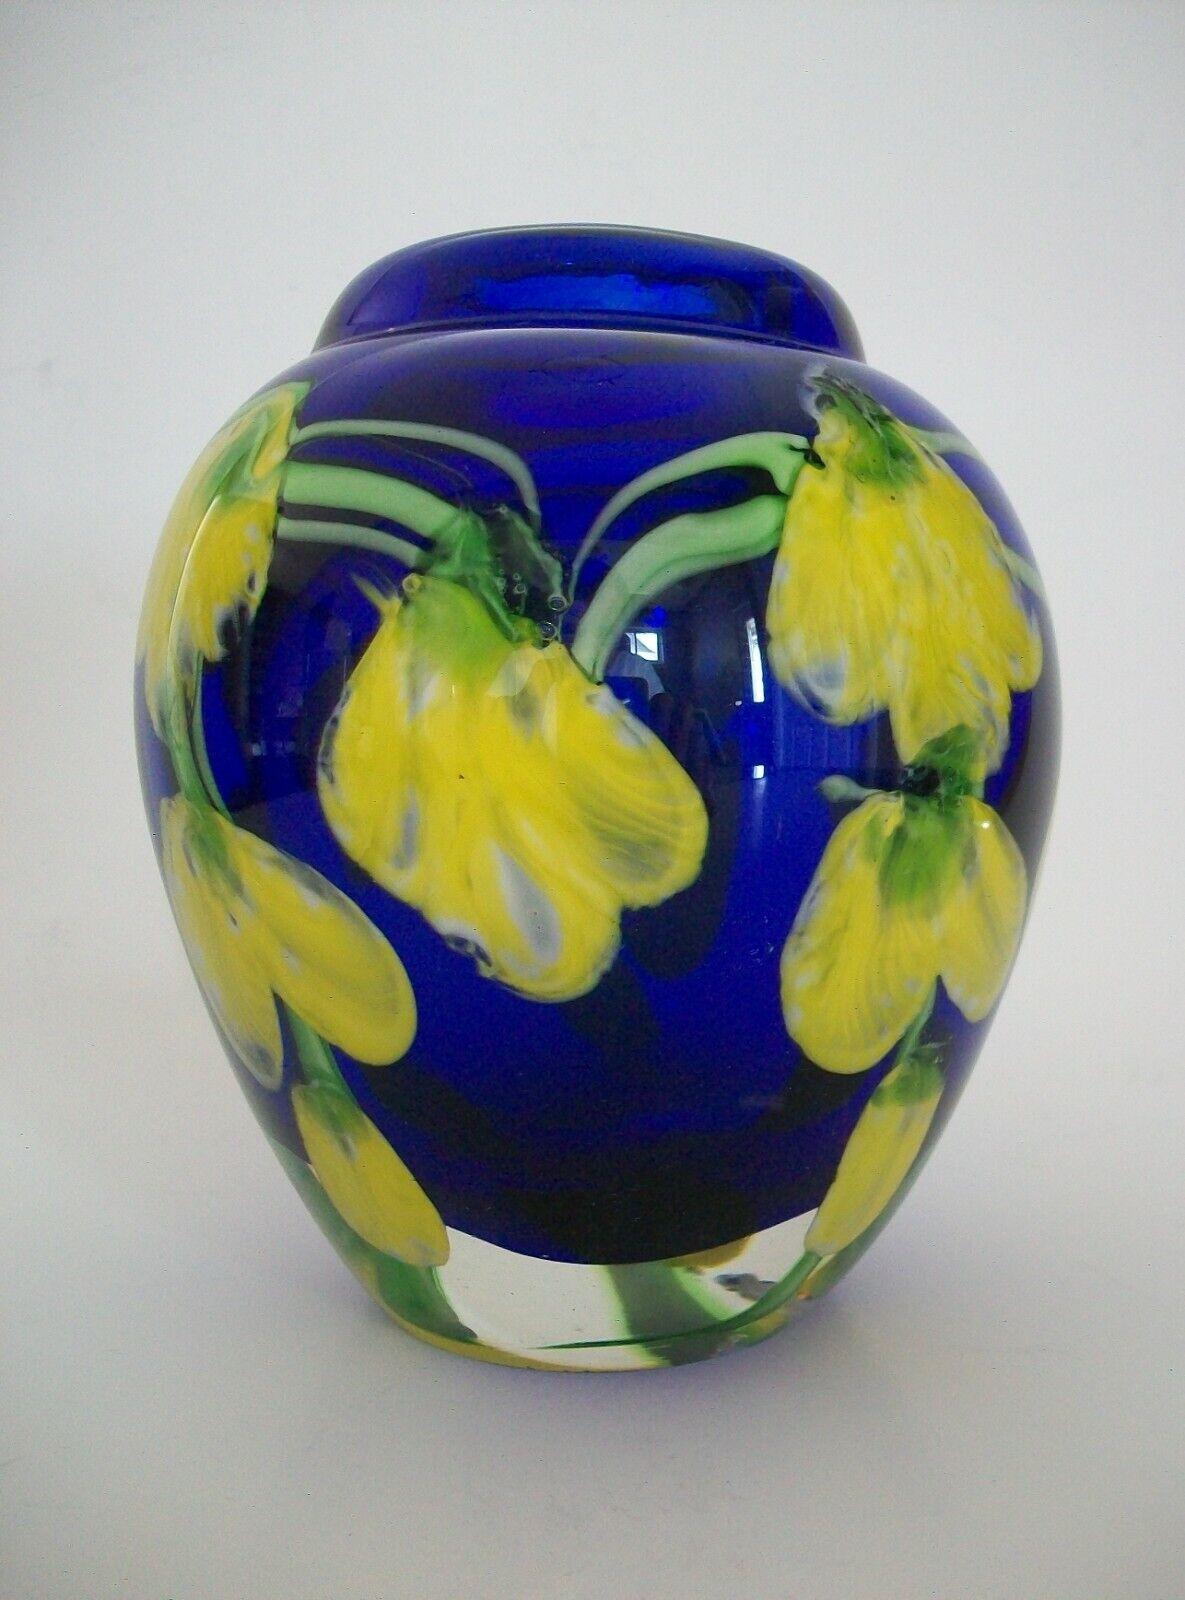 Vintage Murano art glass paperweight vase featuring encased 'Golden Chain Laburnum' - striking blue and yellow color combination - remnants of an old foil or paper label to the base - Italy - circa 1970's.

Excellent vintage condition - minor